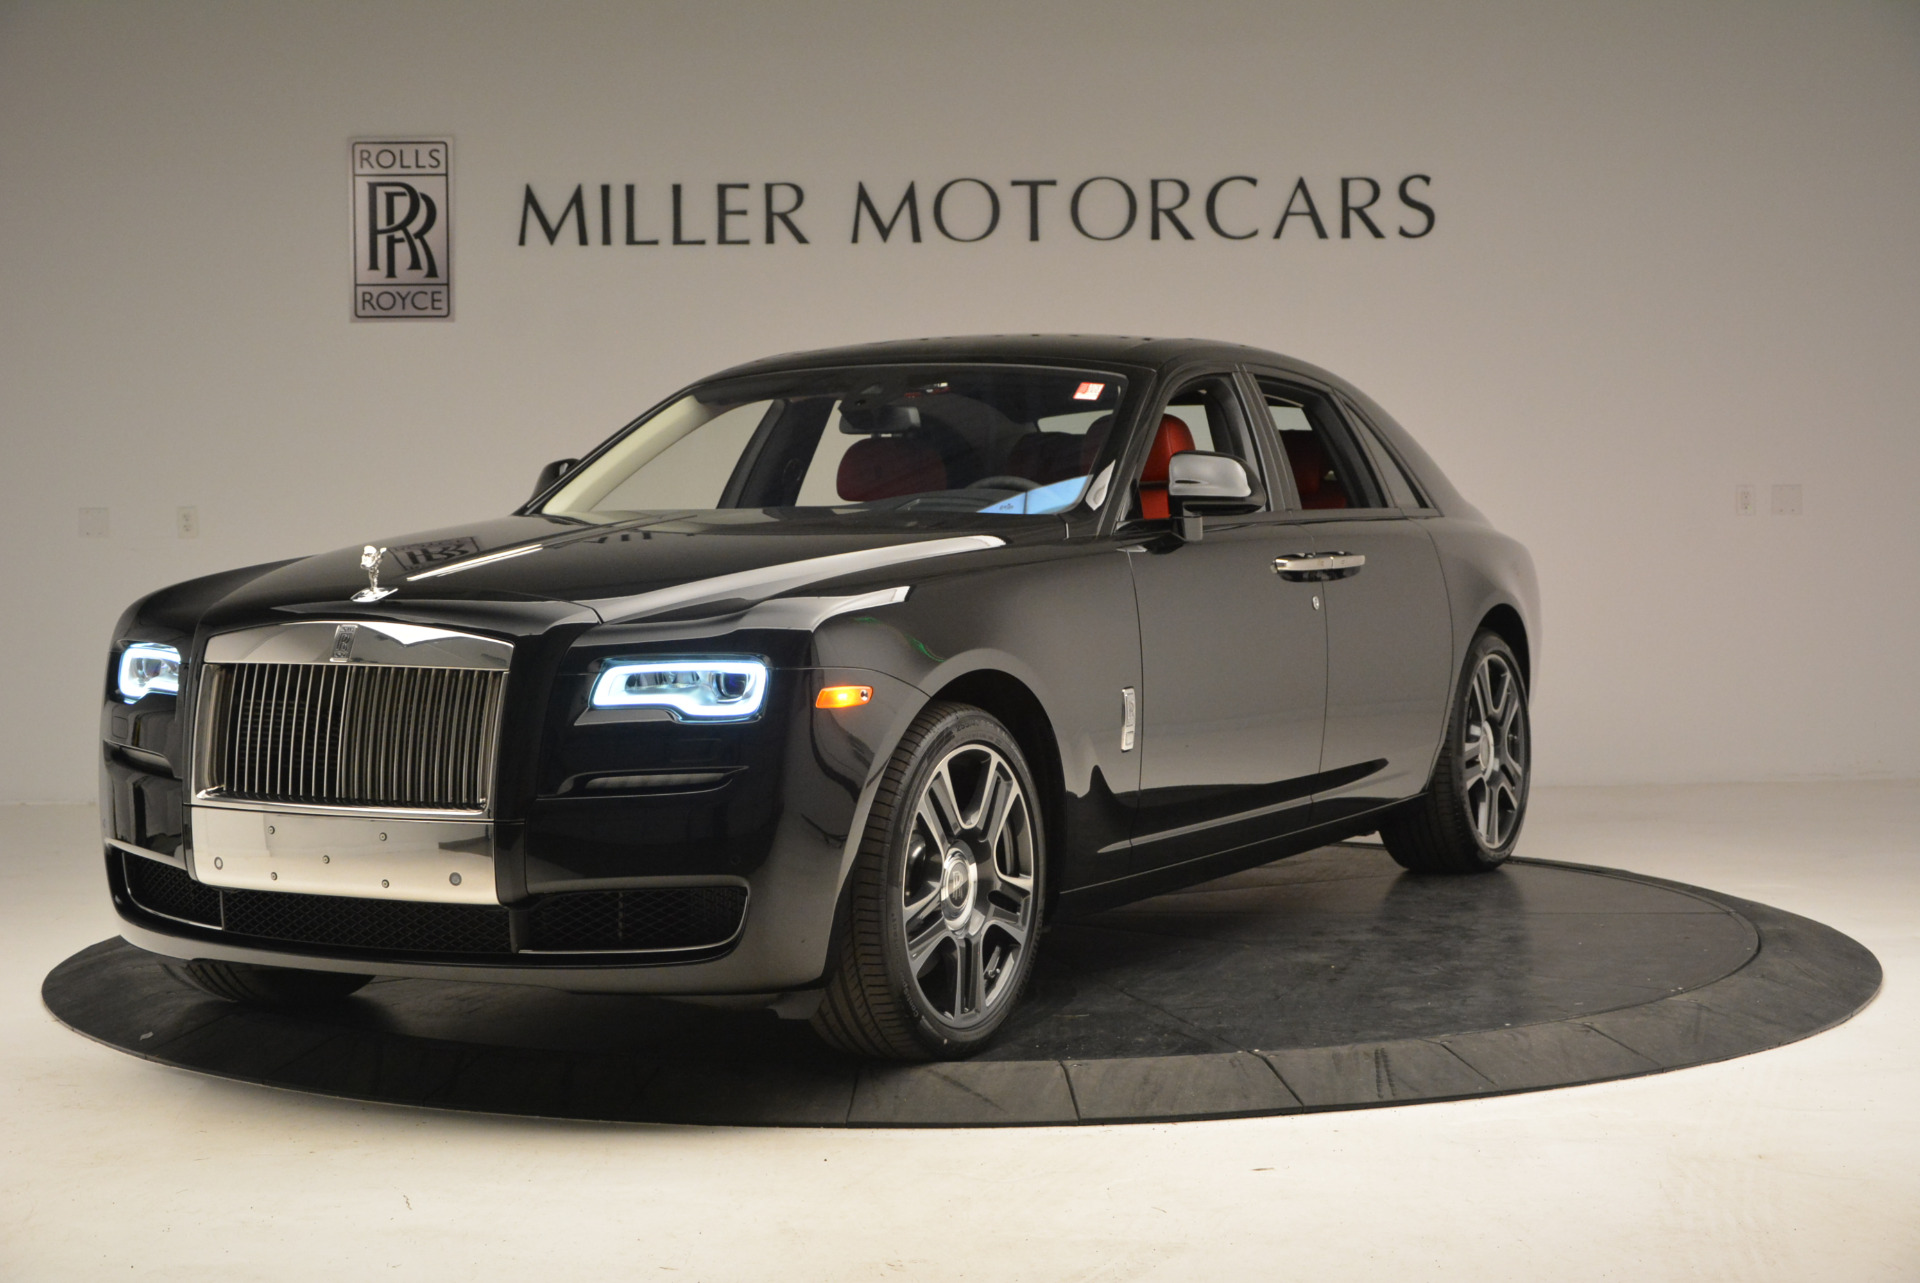 2017 ROLLSROYCE GHOST  6205 MILES for sale by auction in Merseyside  United Kingdom